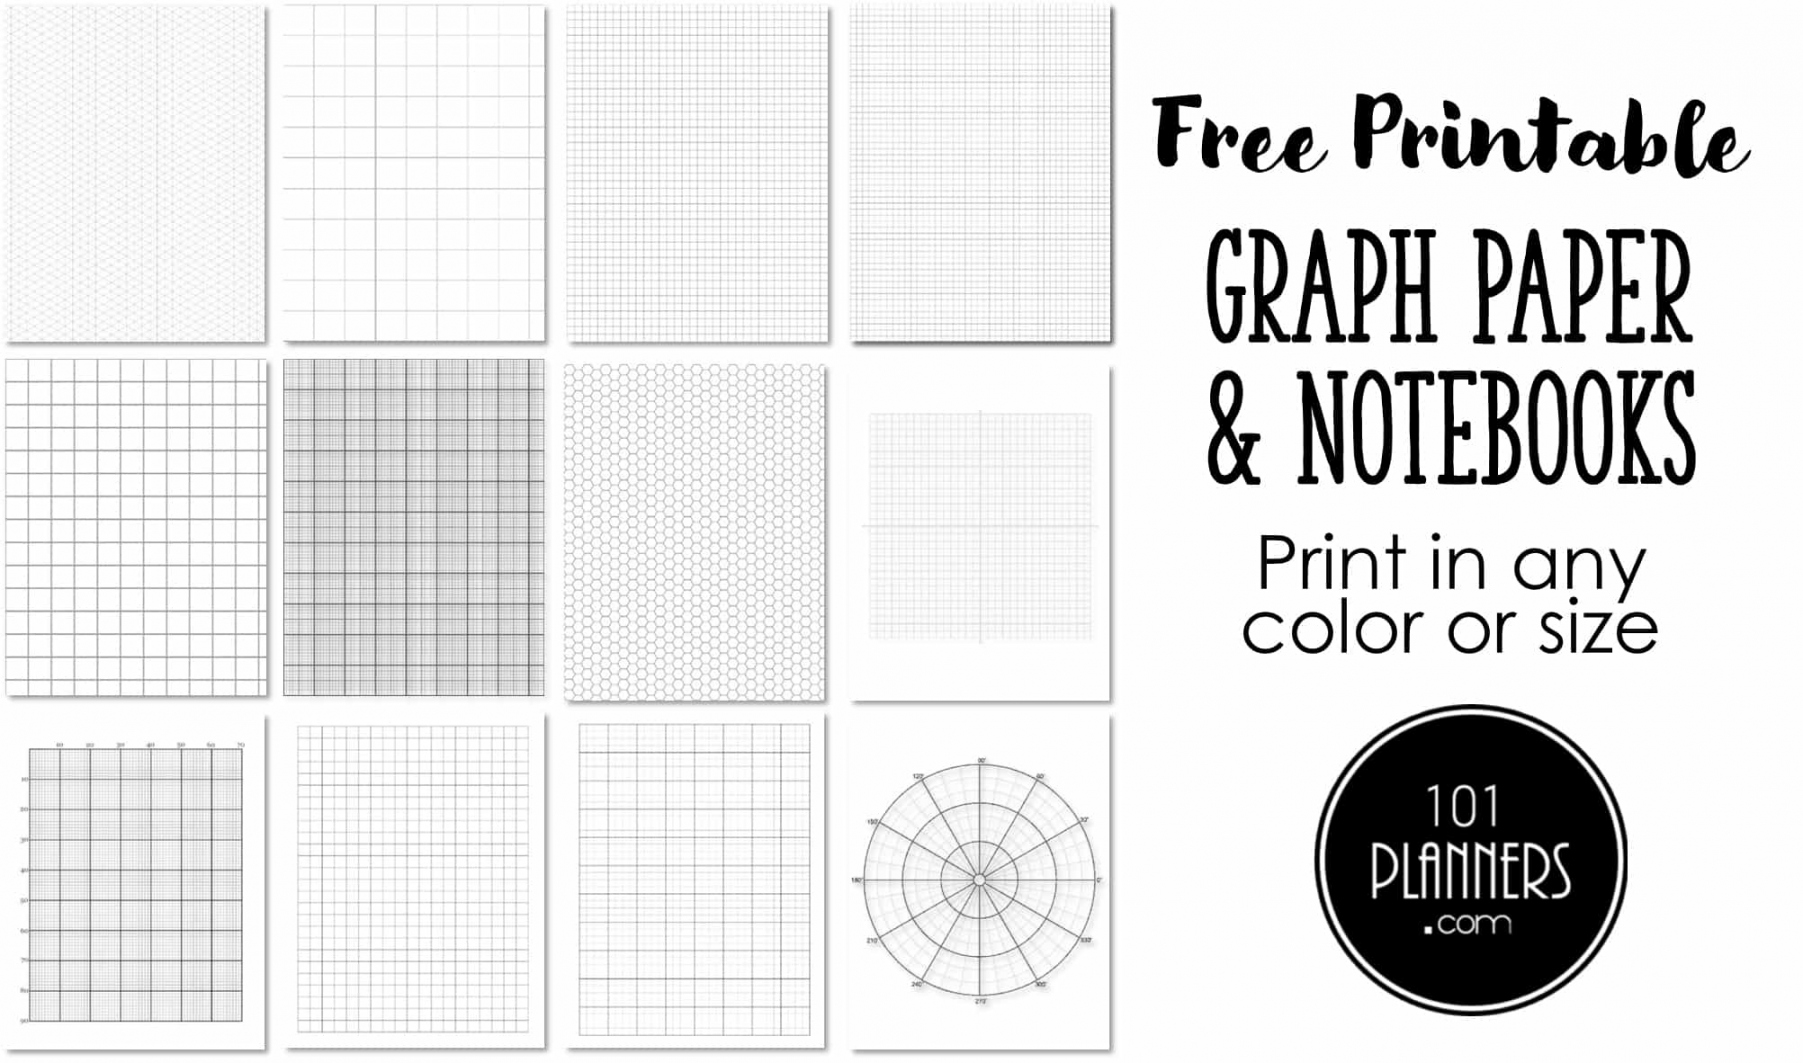 FREE Printable Graph Paper in Any Color  Word, PDF, jpg or png